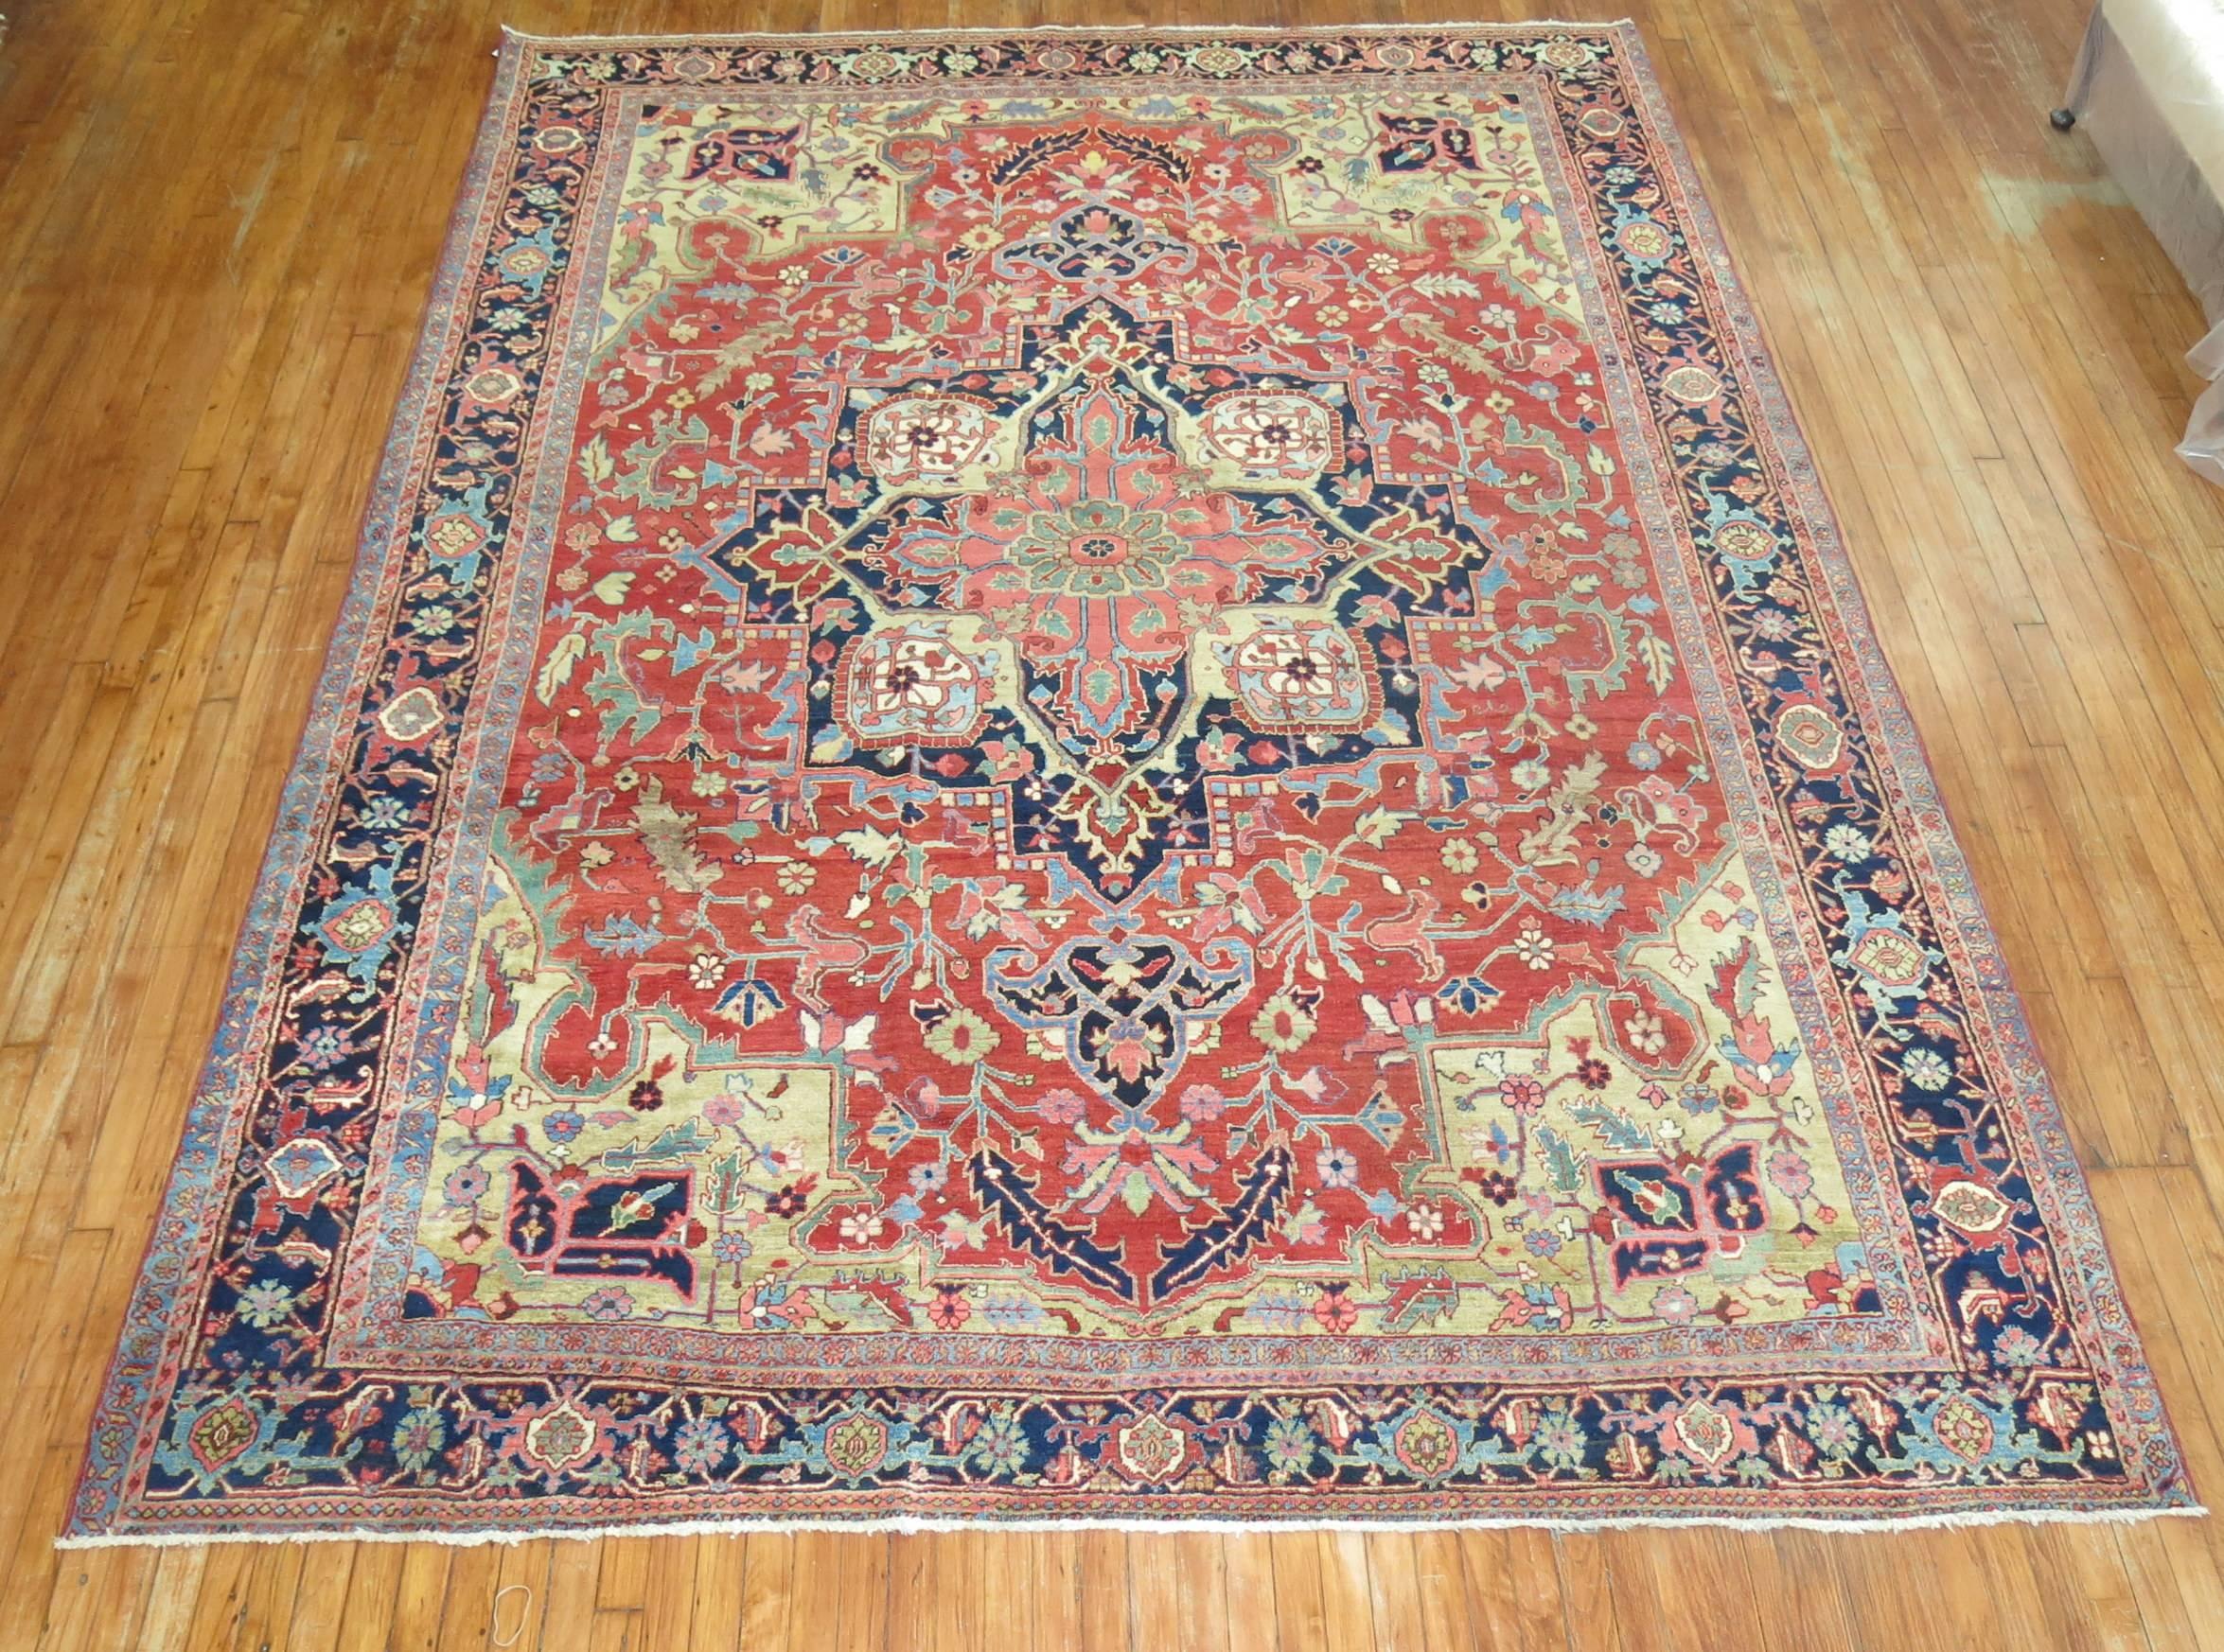 Colorful Persian Serapi Heriz carpet with a watermelon red field and navy blue medallion and border. This piece is finely woven and in full pile condition. Dimensions: 8'6